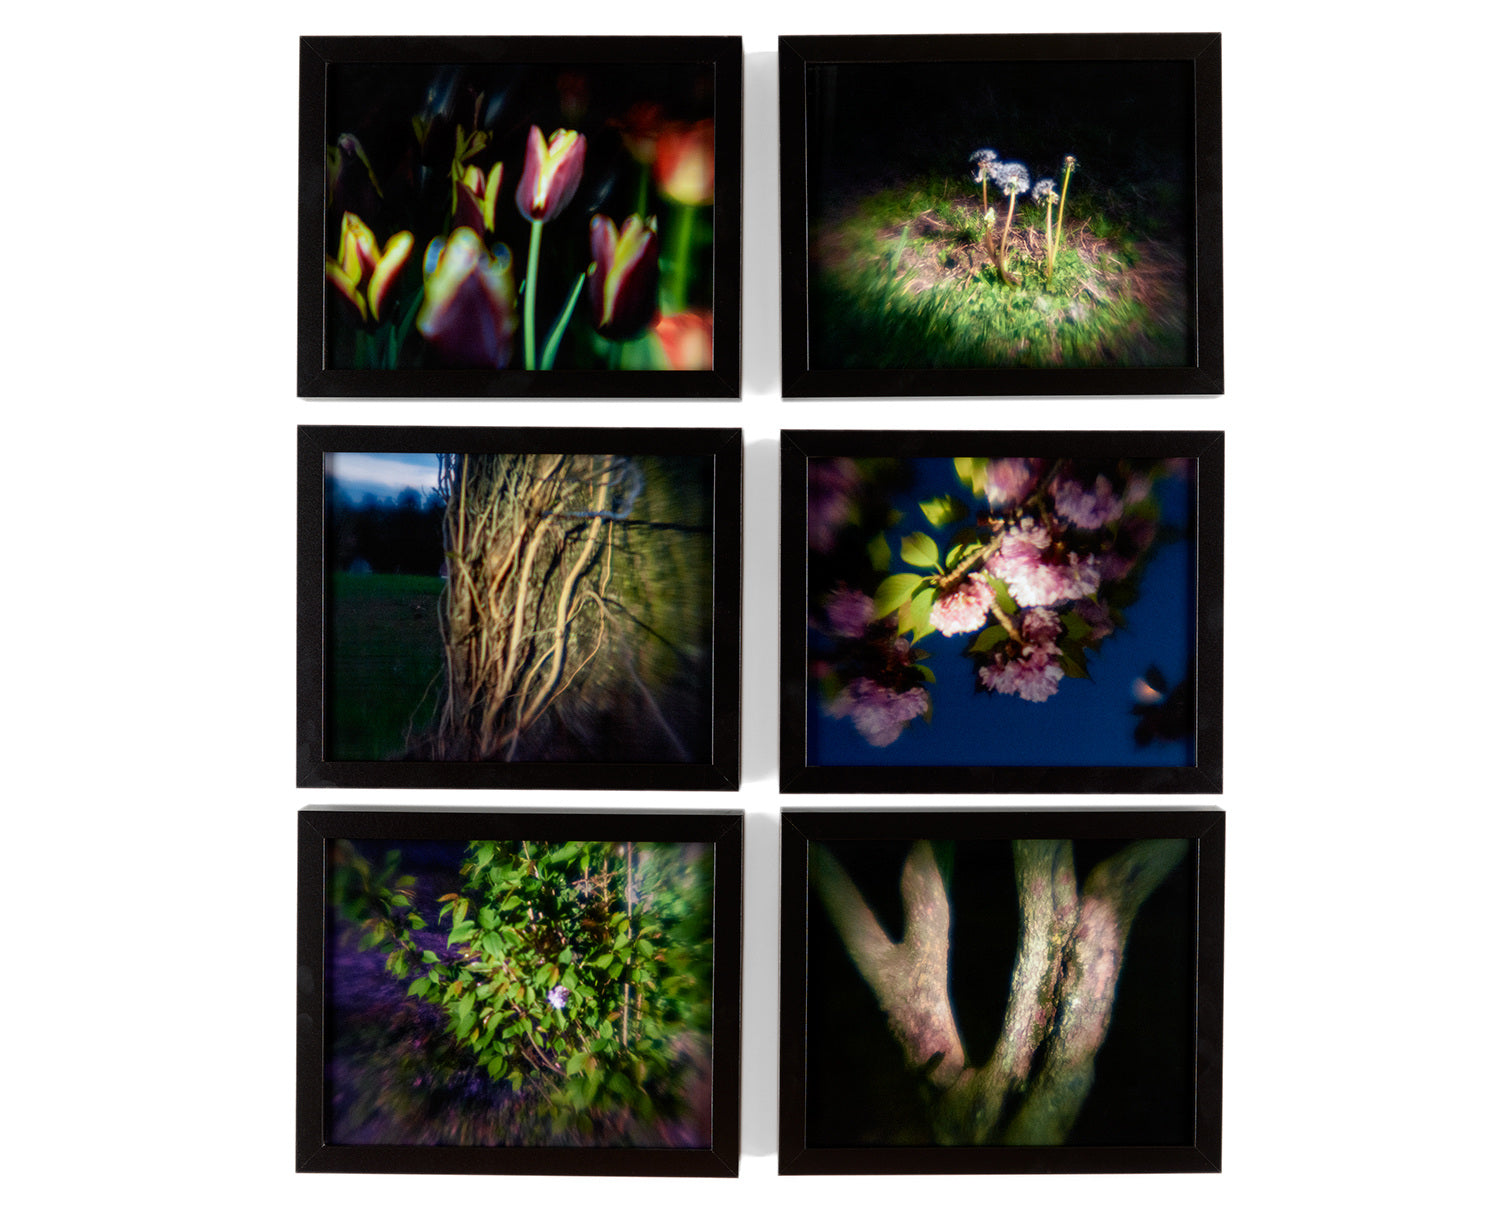 There Is A Light - Flowers Photo Print (S/M sizes available)